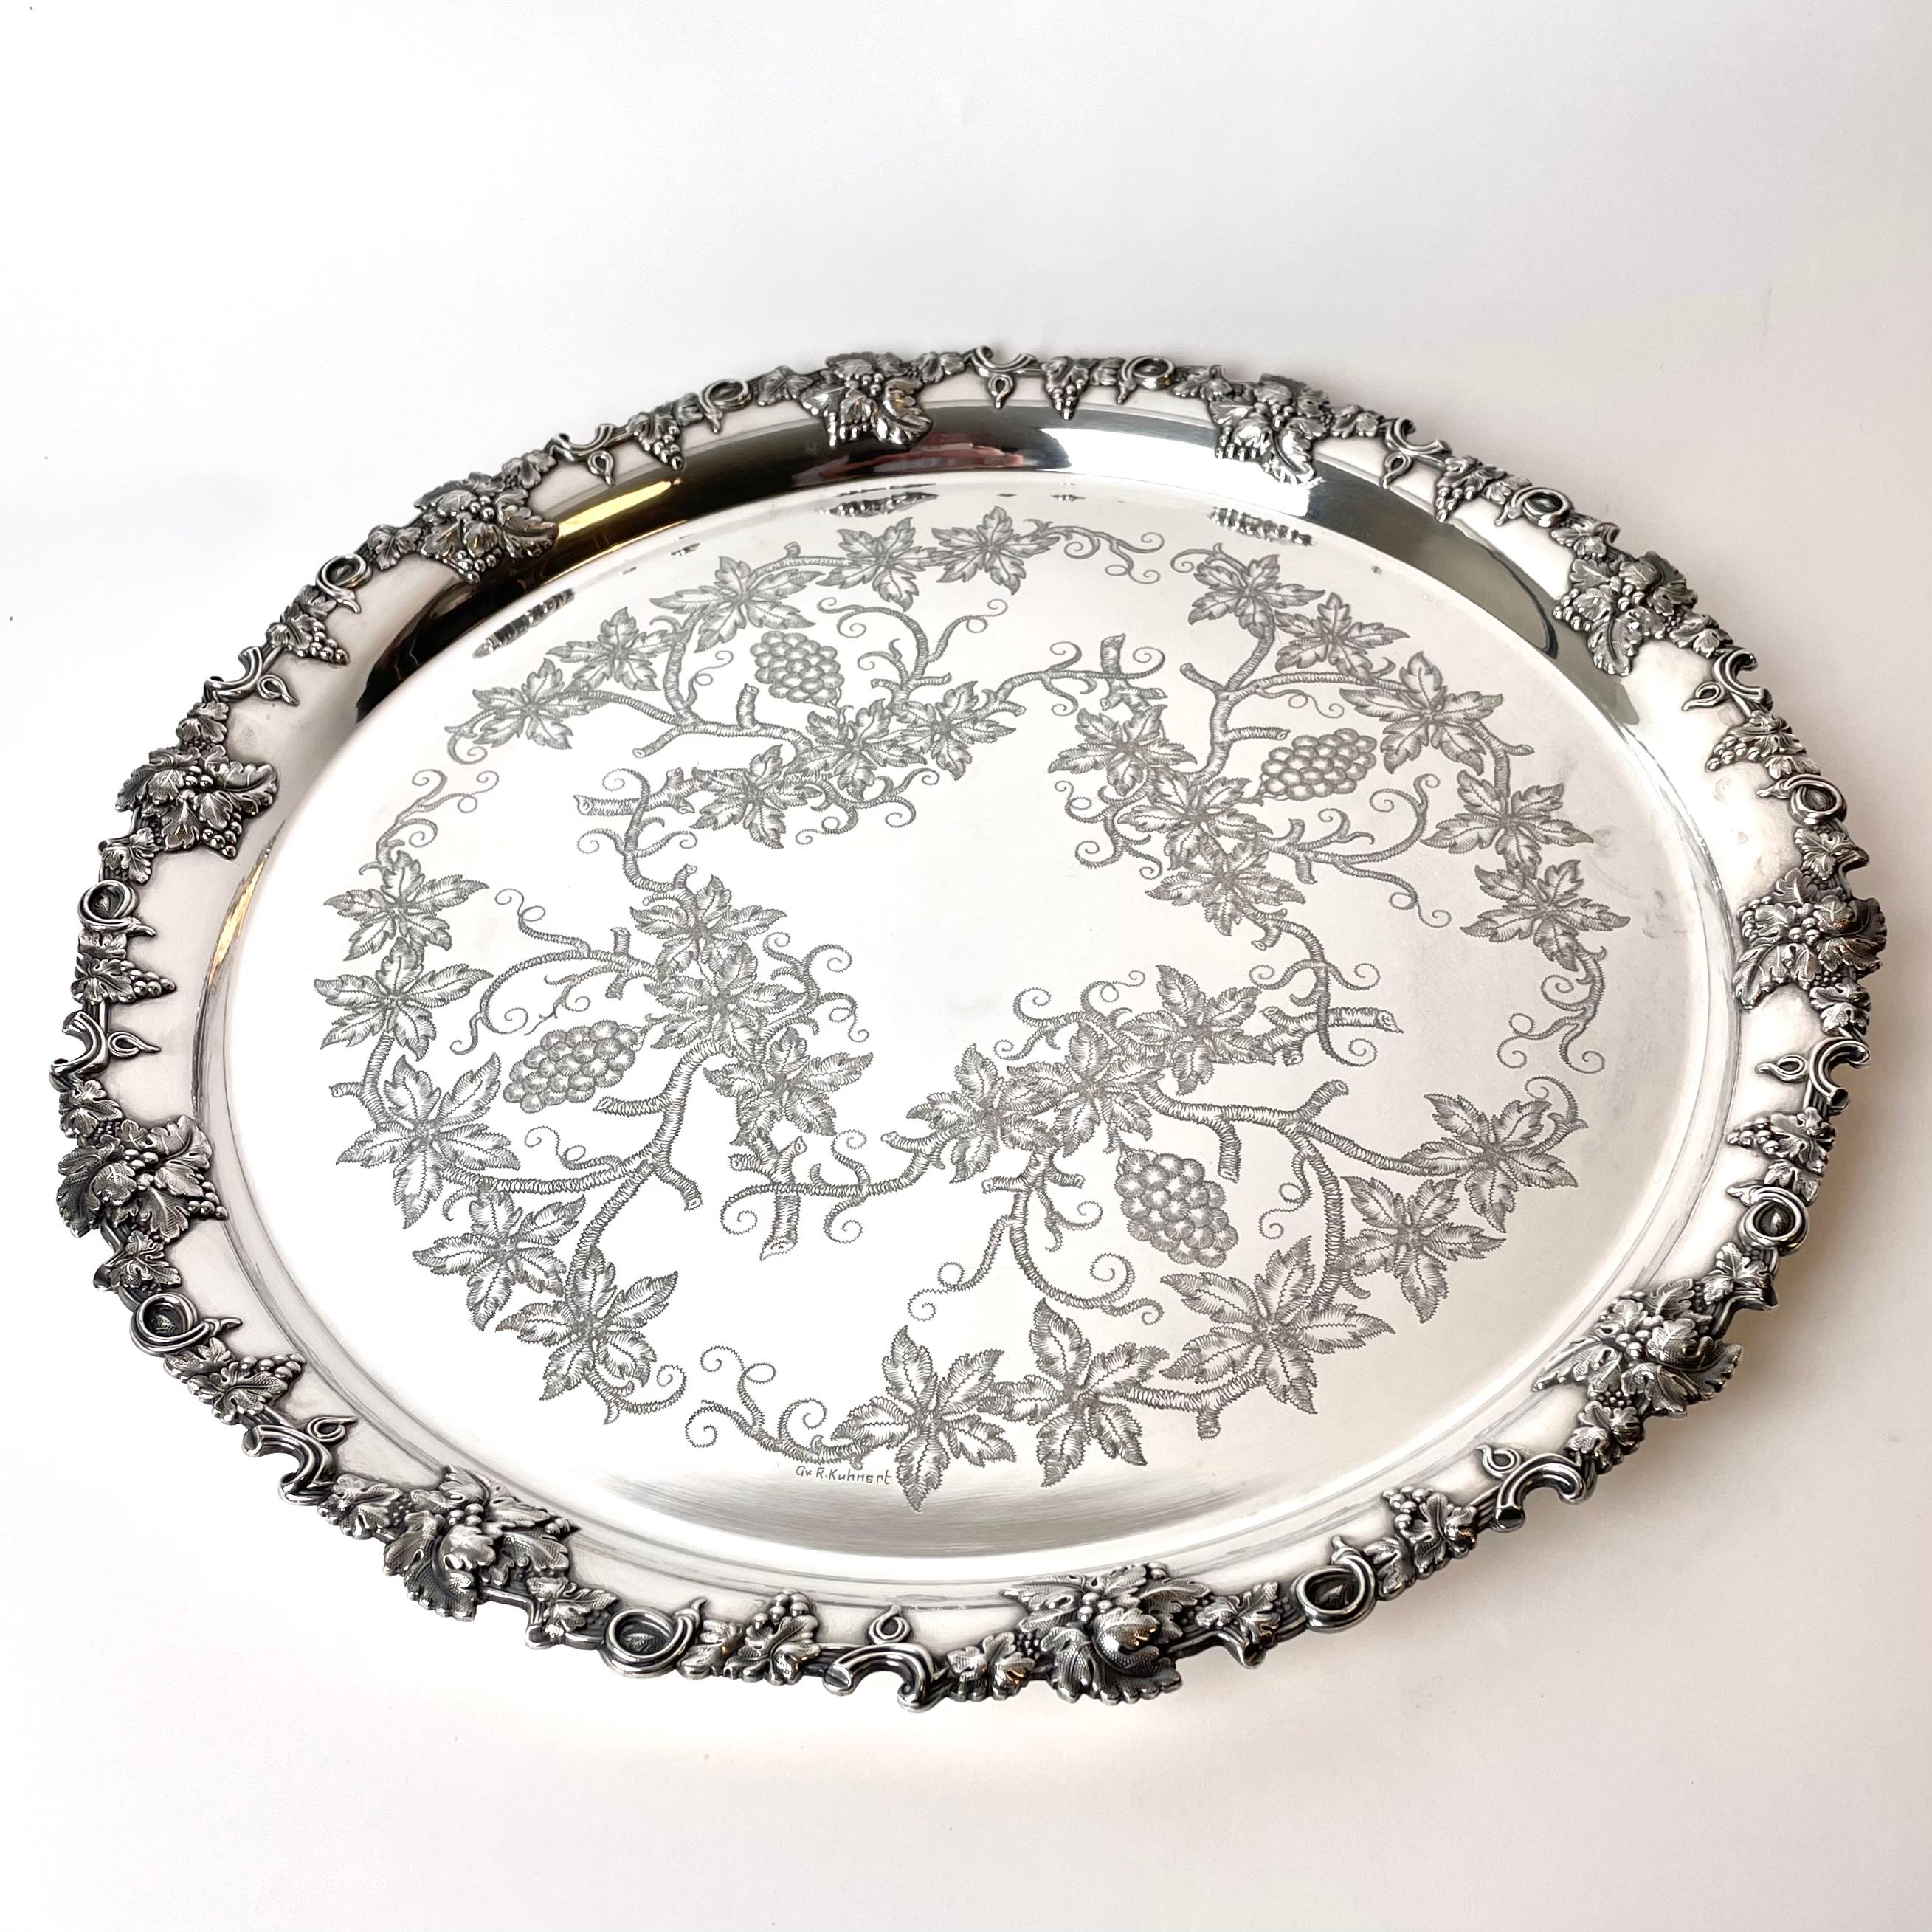 A beautiful serving tray in silver plate by the best silver plating company in Sweden, A.G Dufva. Made in the early 20th century and signed by the engraver R. Kuhnert.

Richly decorated with grapes and grape leaves.

Wear consistent with age and